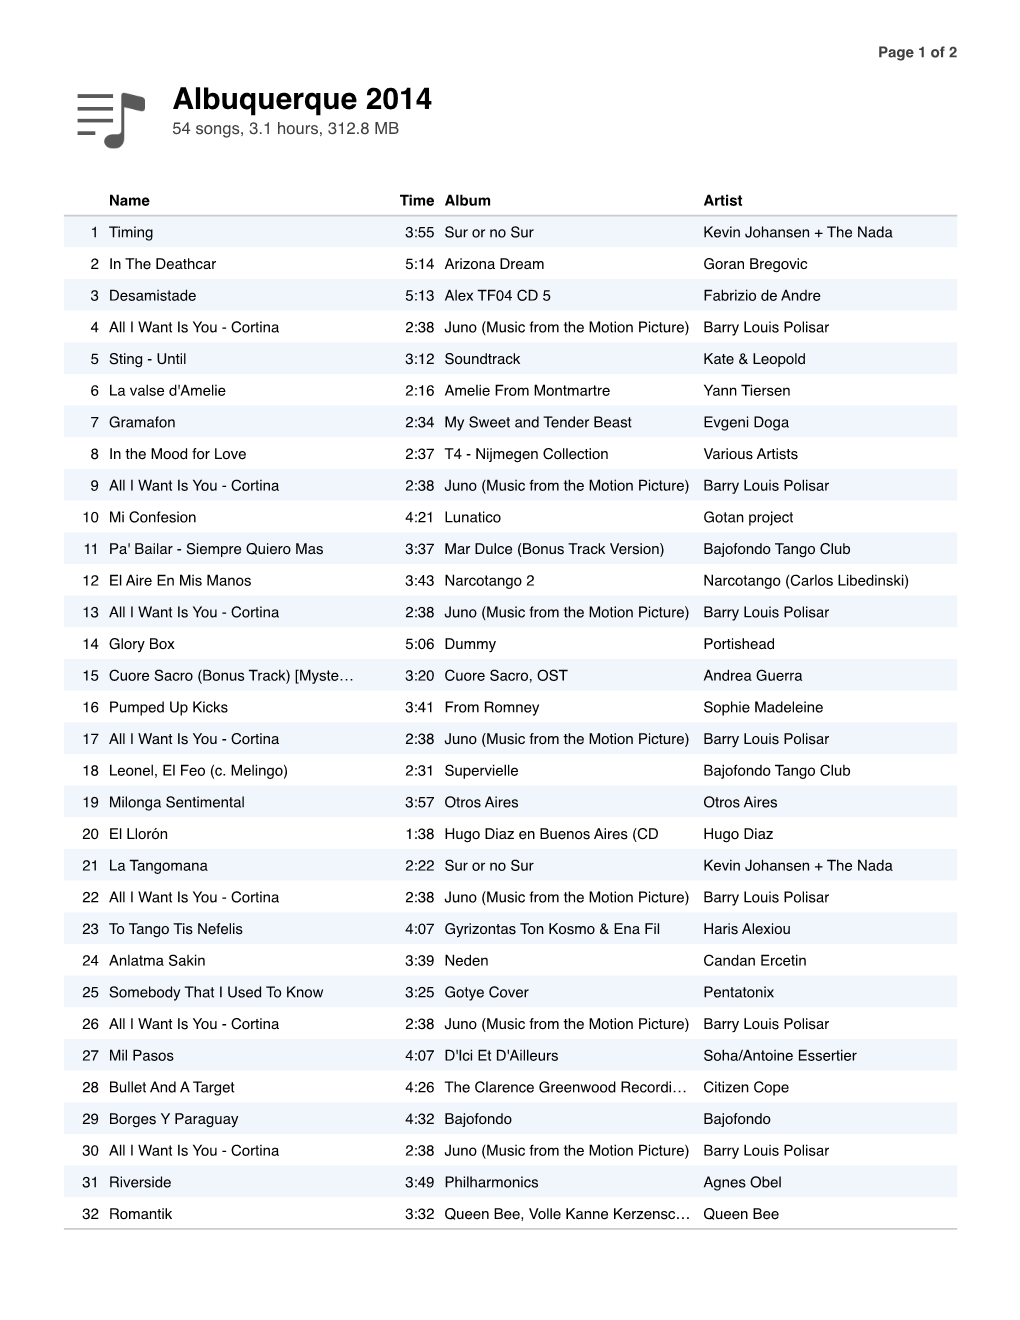 Albuquerque 2014 54 Songs, 3.1 Hours, 312.8 MB